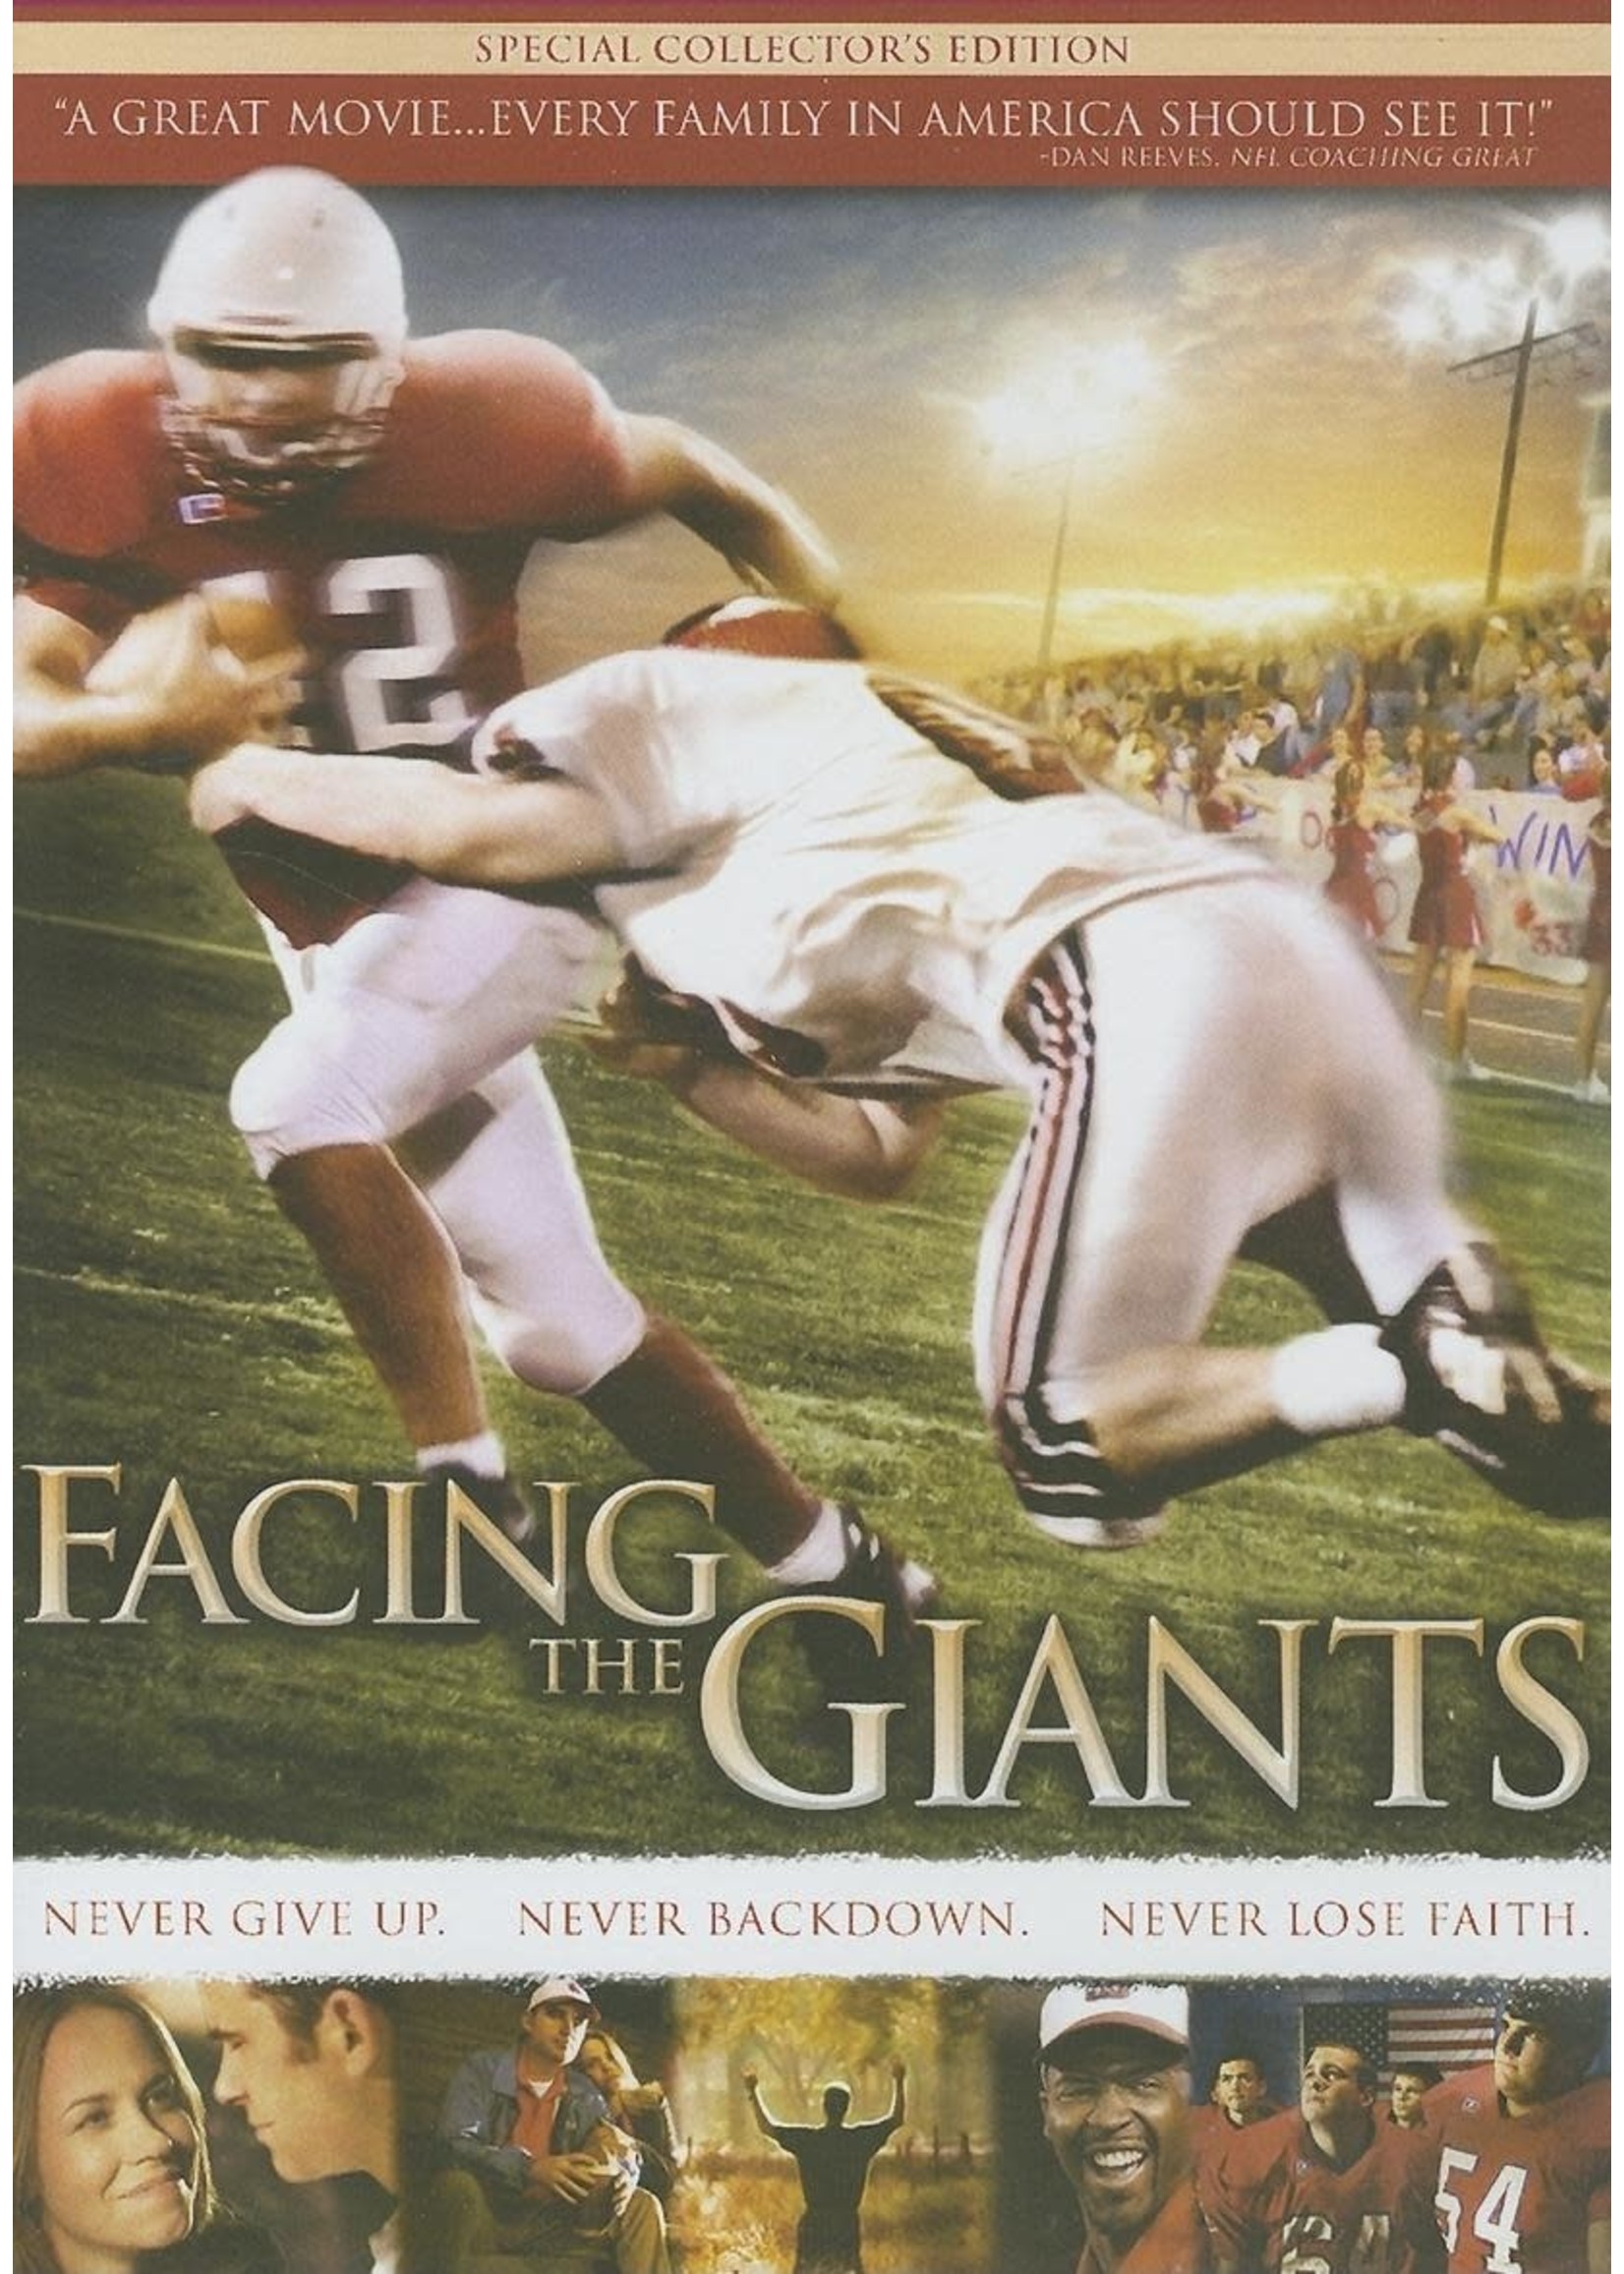 Provident-Integrity Distribut 102899 DVD Facing the Giants